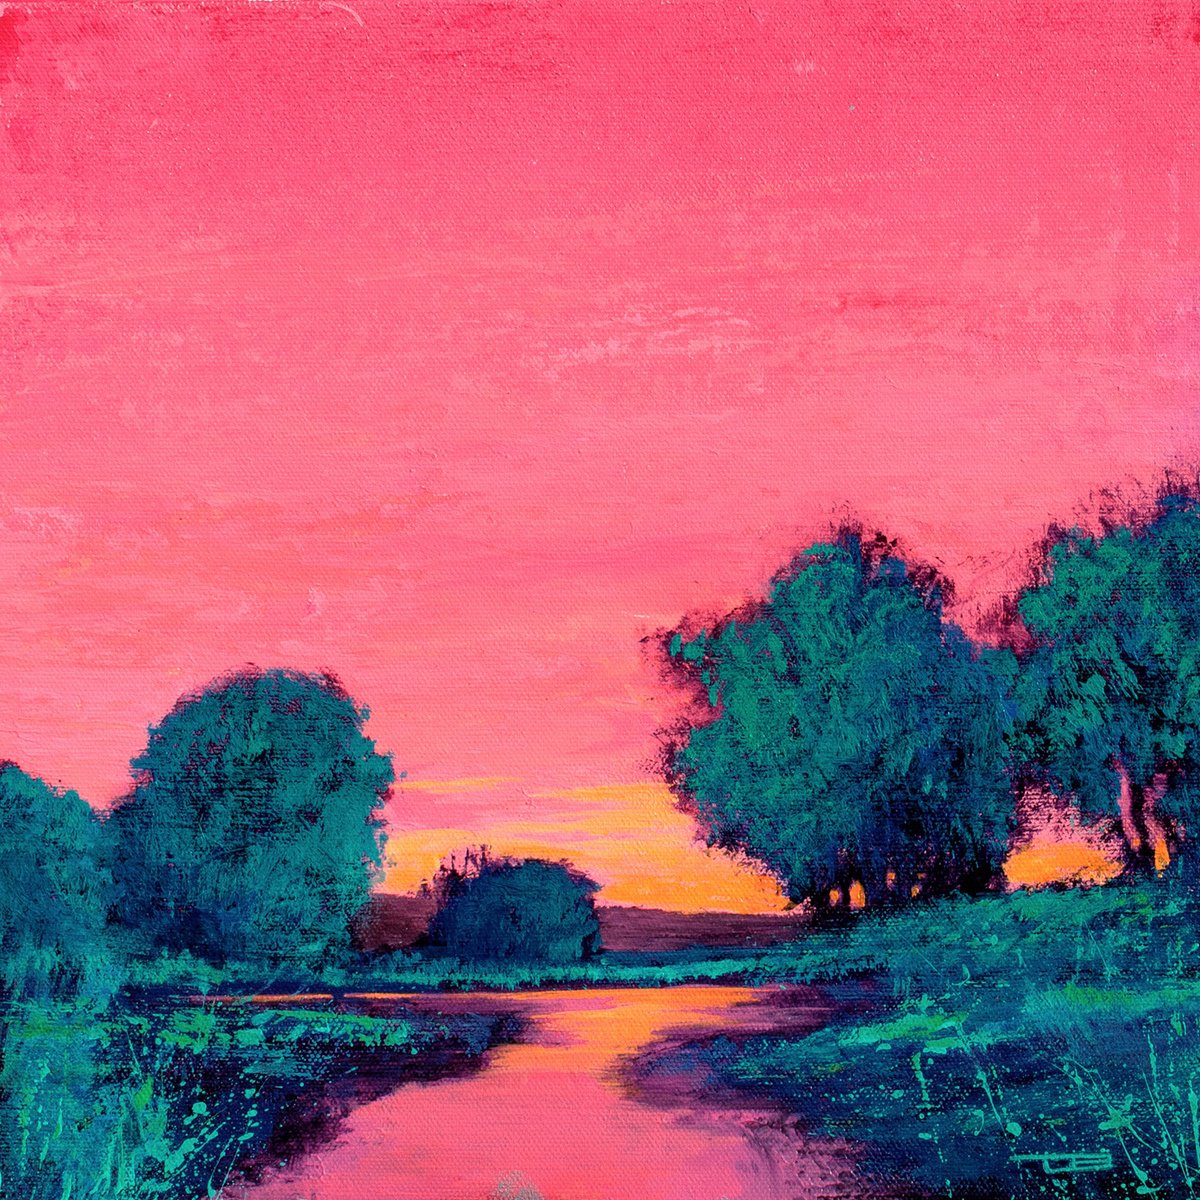 Magenta Sky 230125, sunset landscape with field & trees by Don Bishop